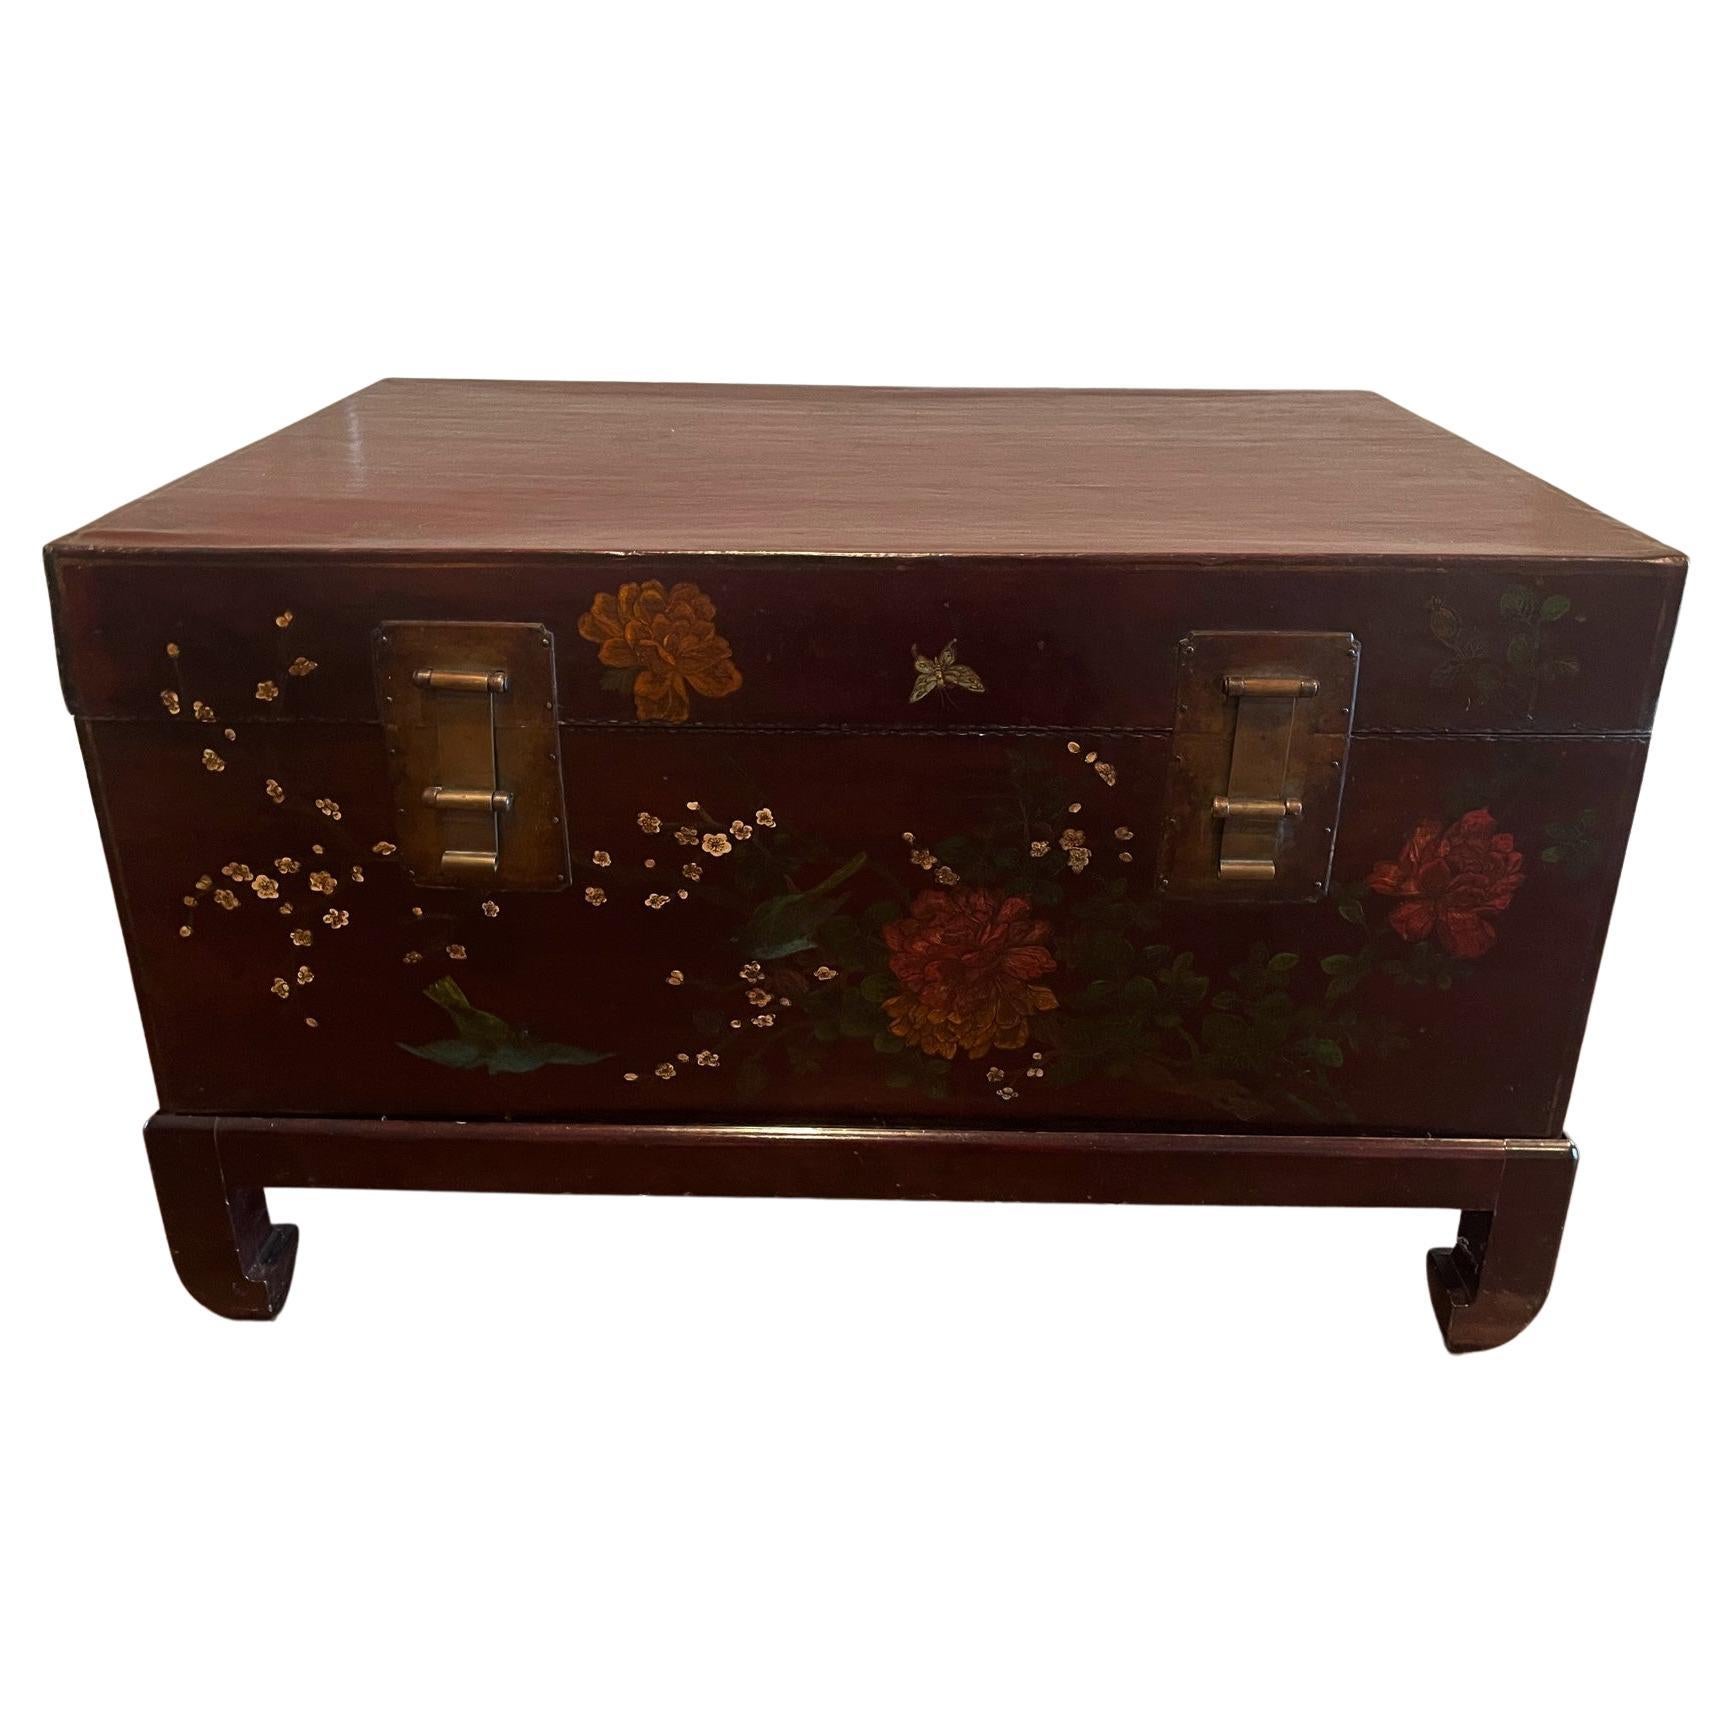 Chinese Leather Trunk with Floral Motif, 18th Century